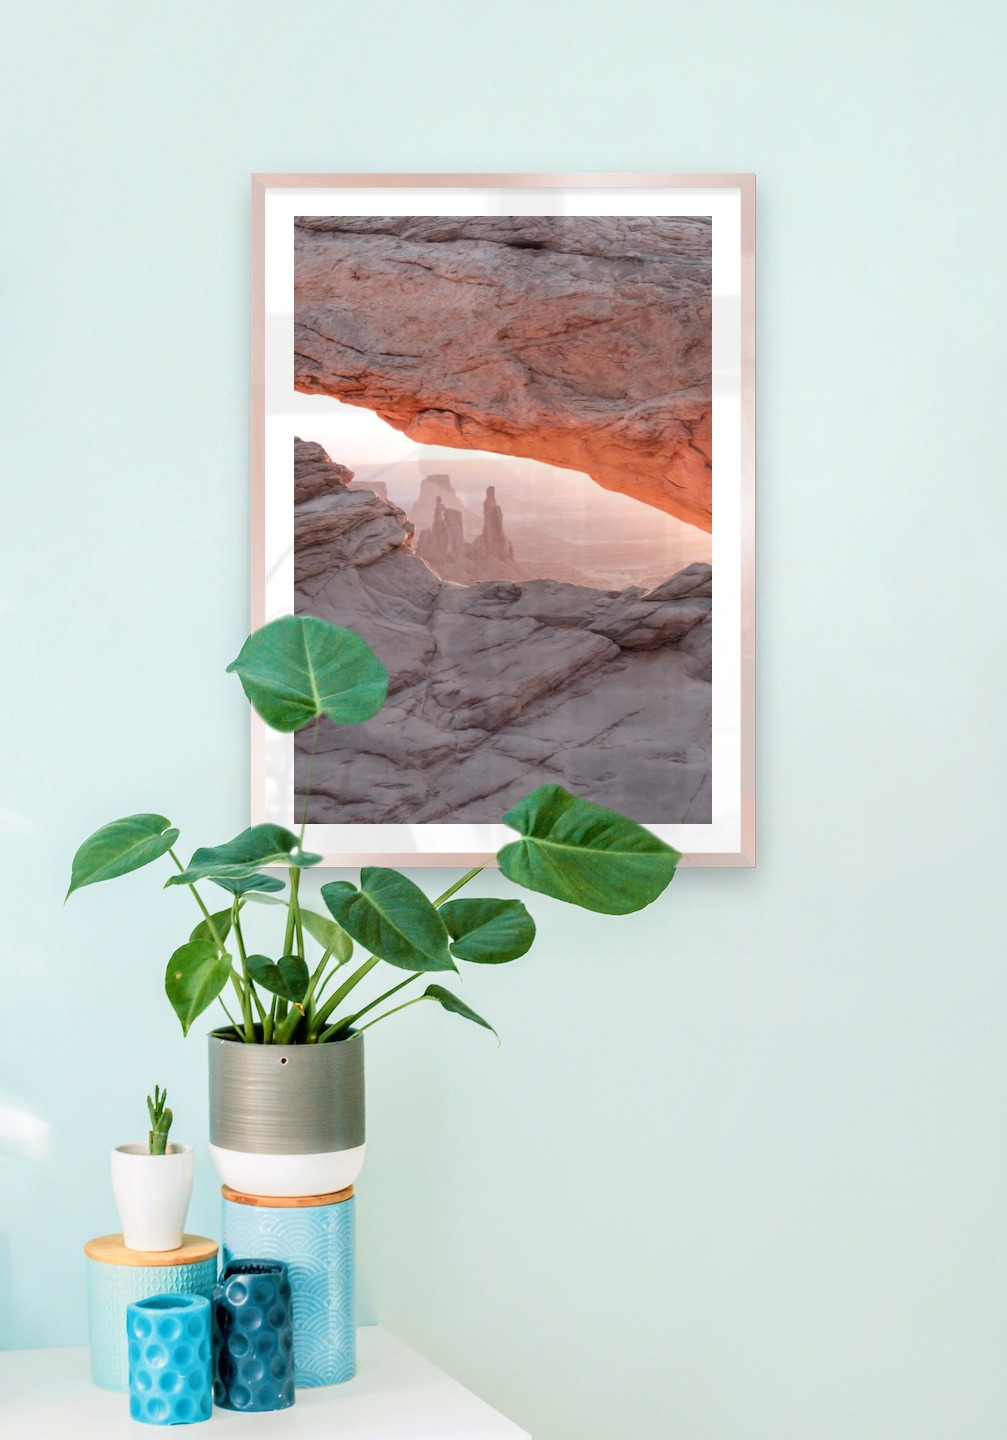 Gallery wall with picture frame in copper in size 50x70 with print "View between cliffs"